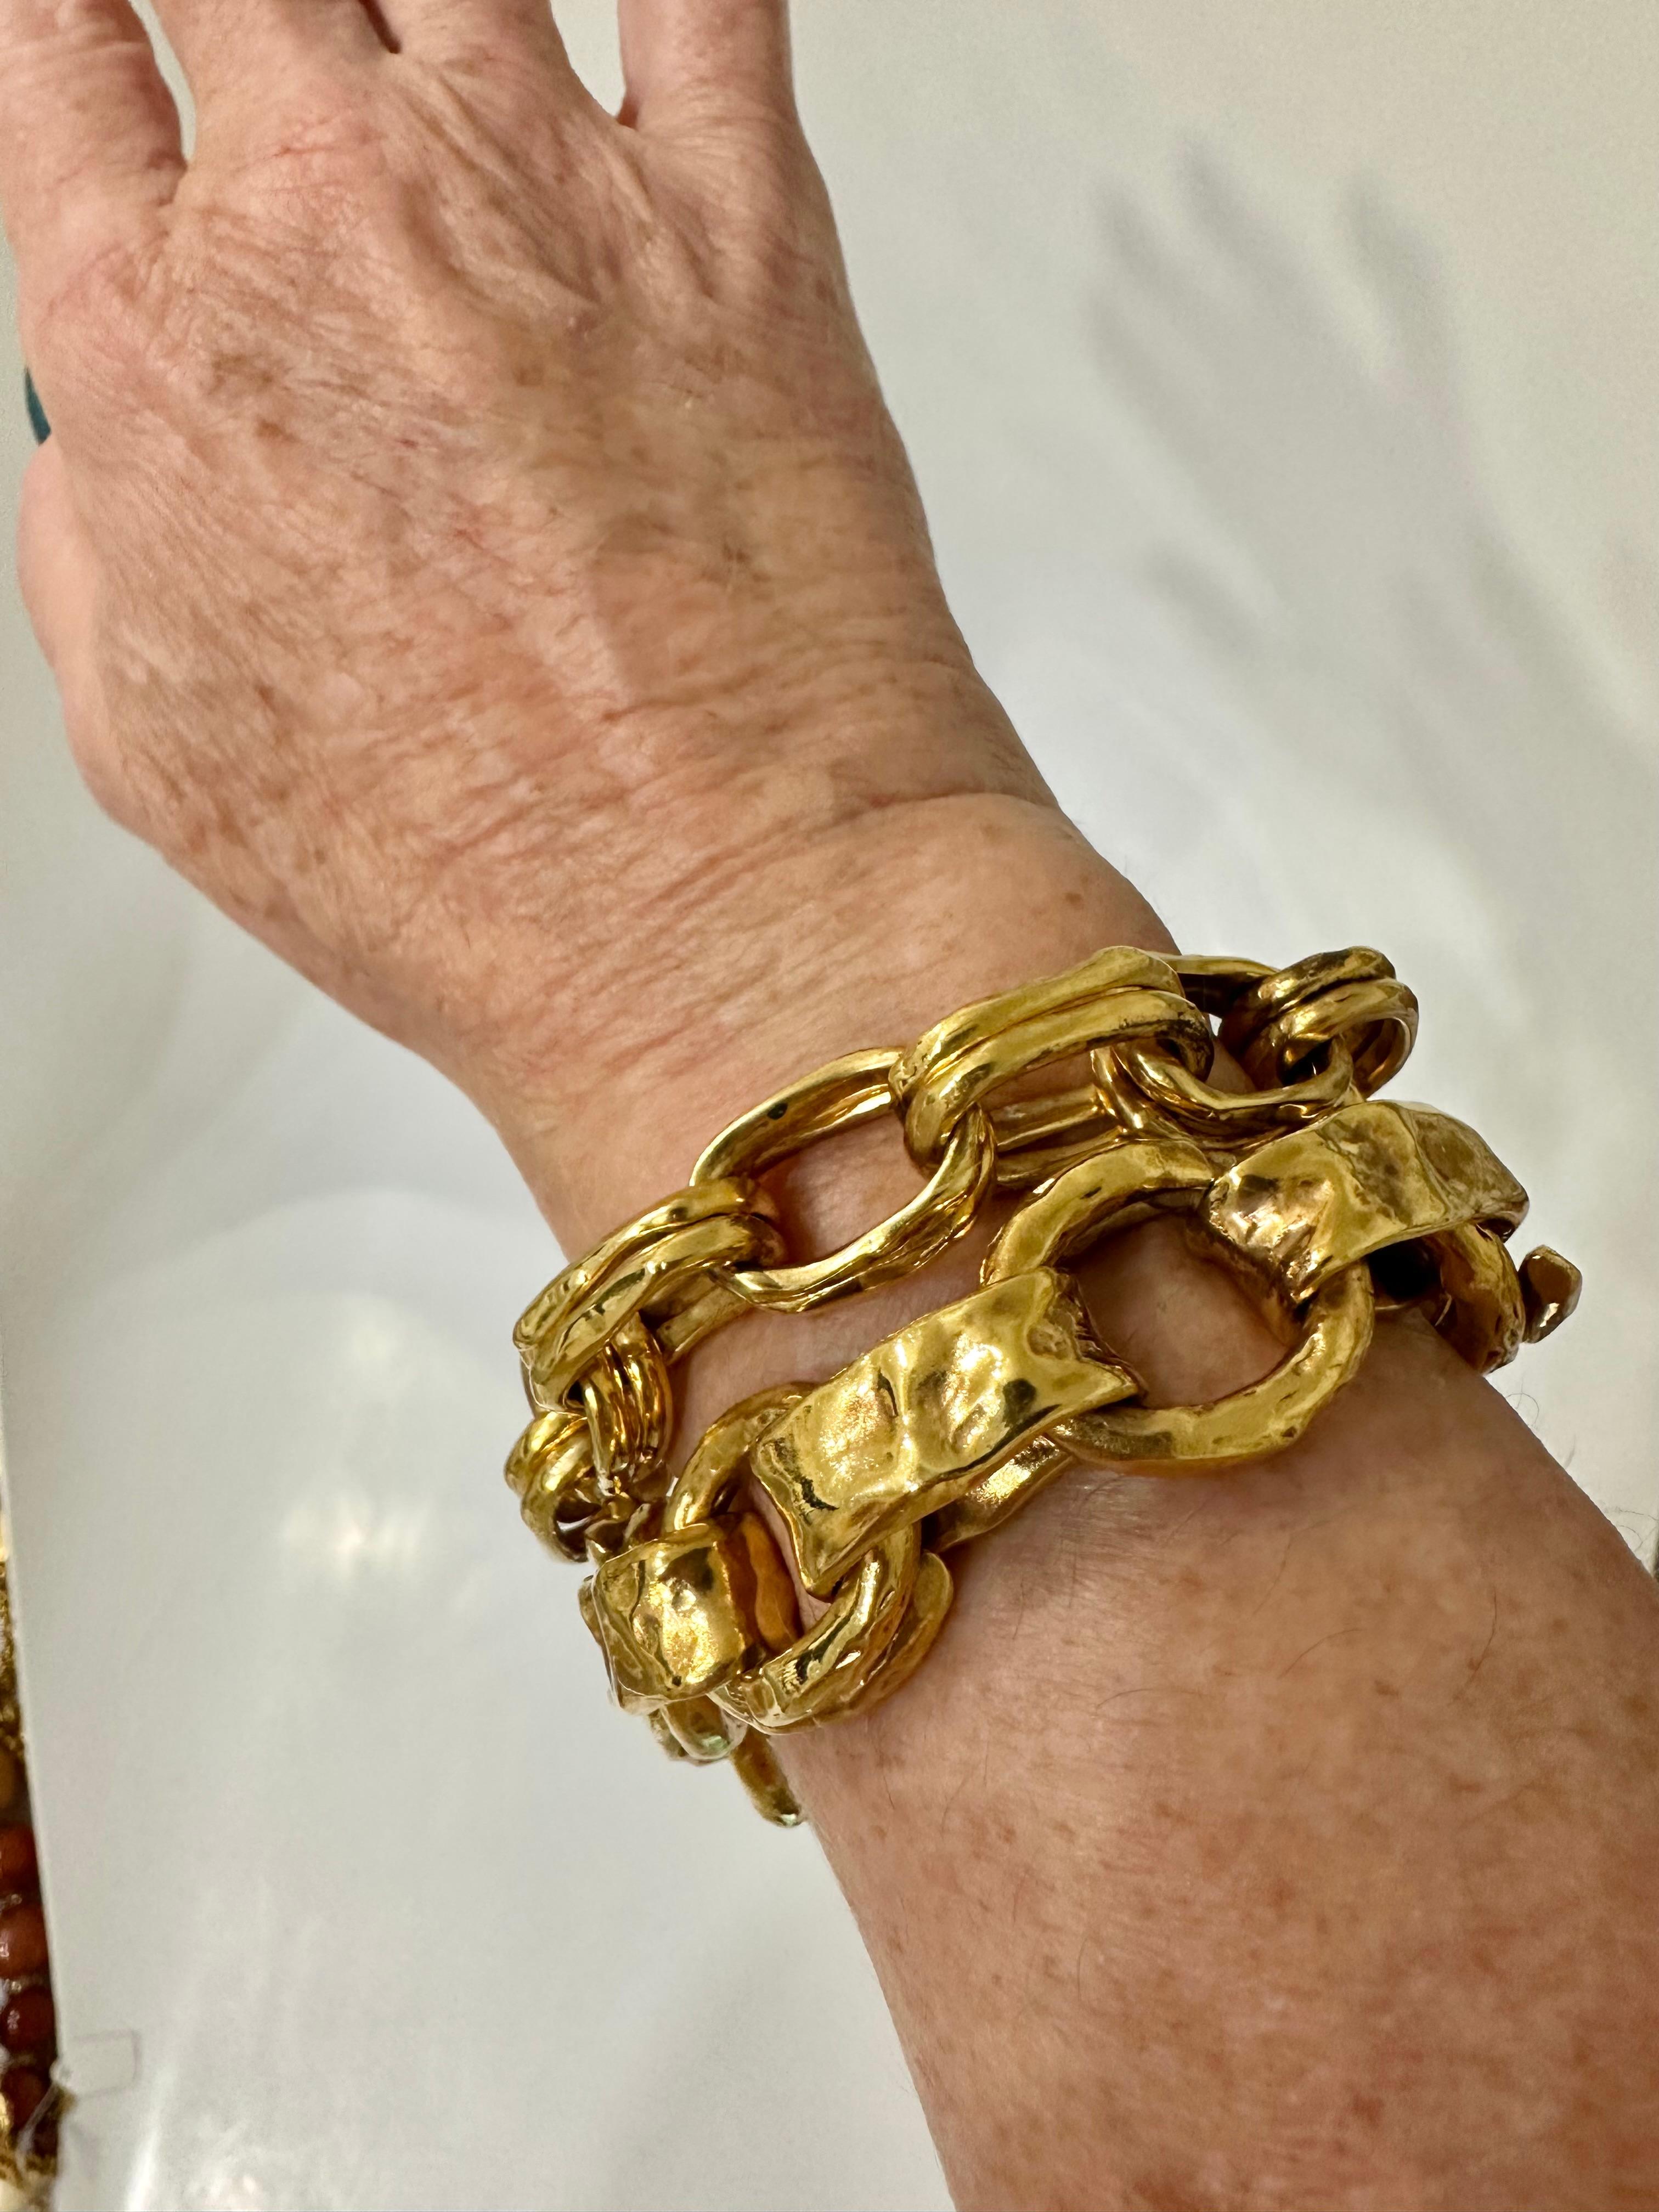 Lutèce Bracelet

New at the House of Goossens. Bracelet from the Lutèce Collection. A precious alchemy of shine and patina, this new collection plays with light and shade. The essence of textured, hammered and patinated Goossens jewellery. Yellow